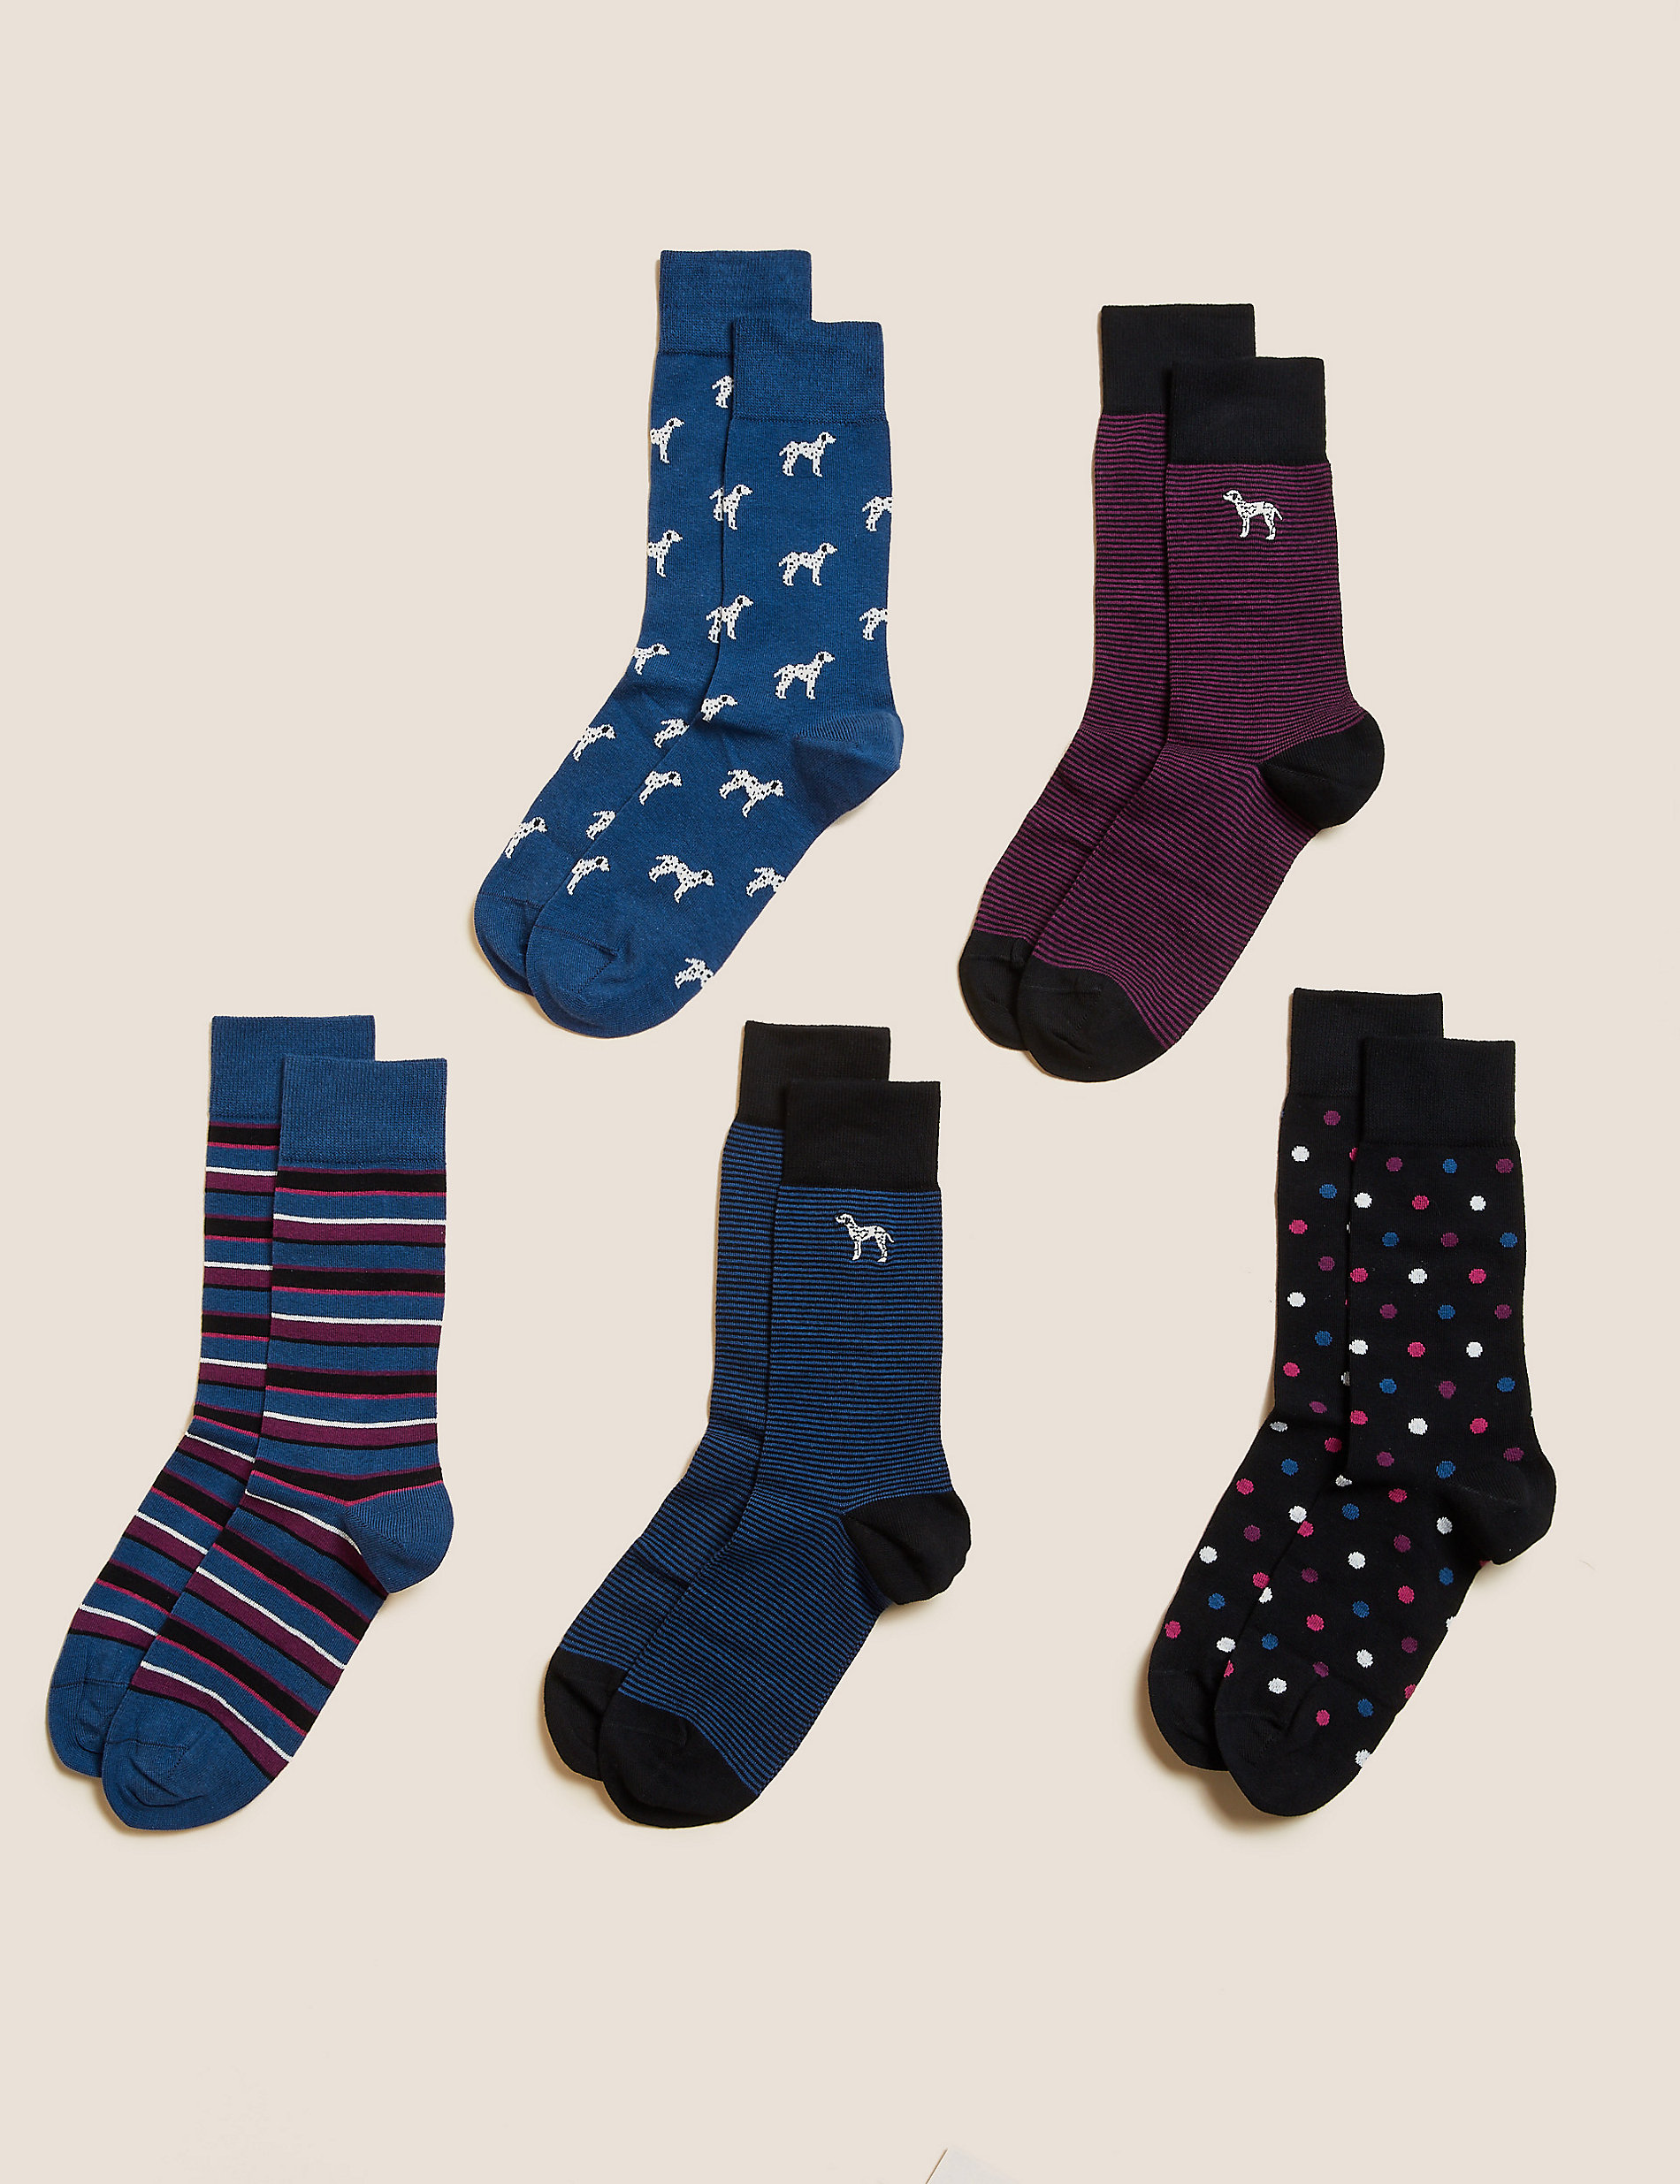 Fa M ou S High St Store Men's 5 Pairs Cool & Freshfeet Assorted Cotton Socks 